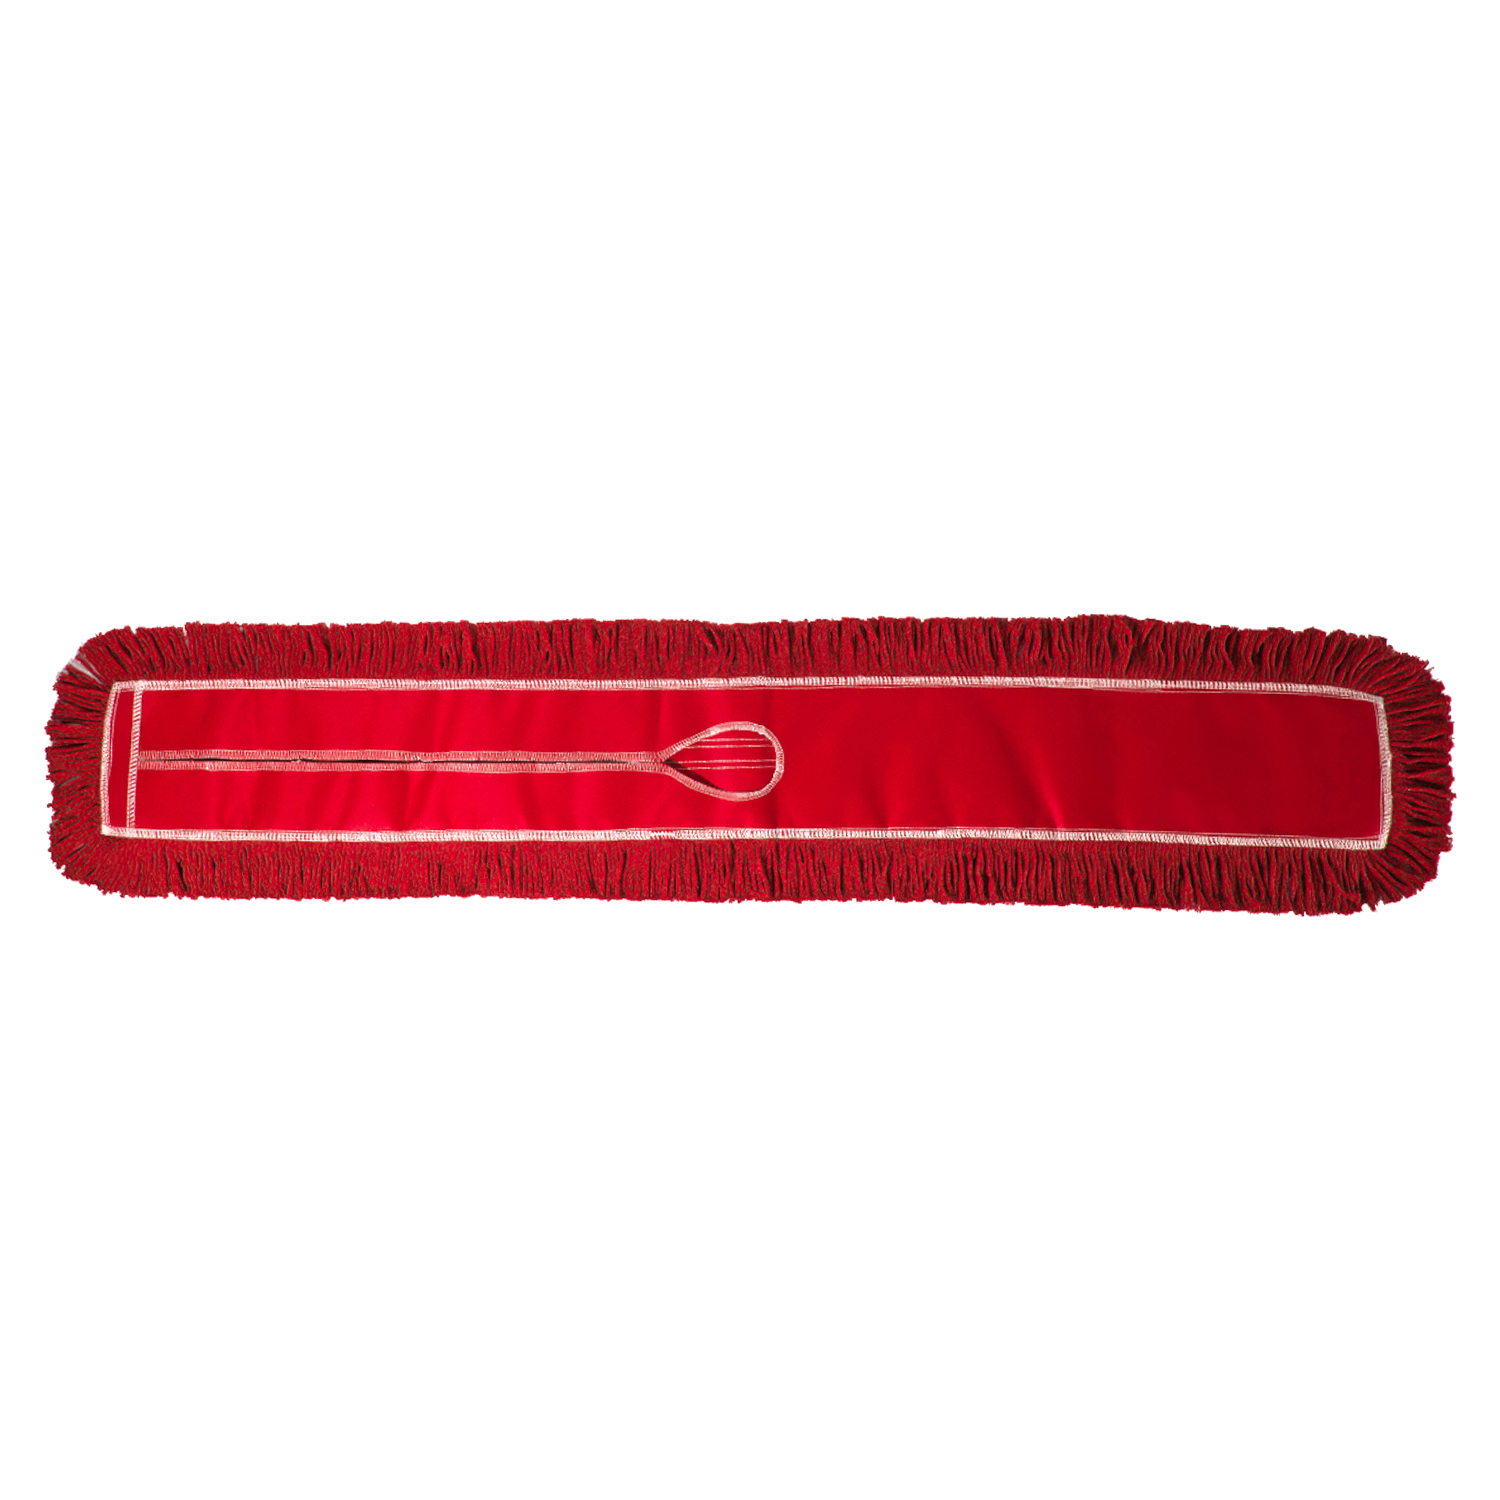 Tidy Tools 48 Inch Dust Mop Refill, Red